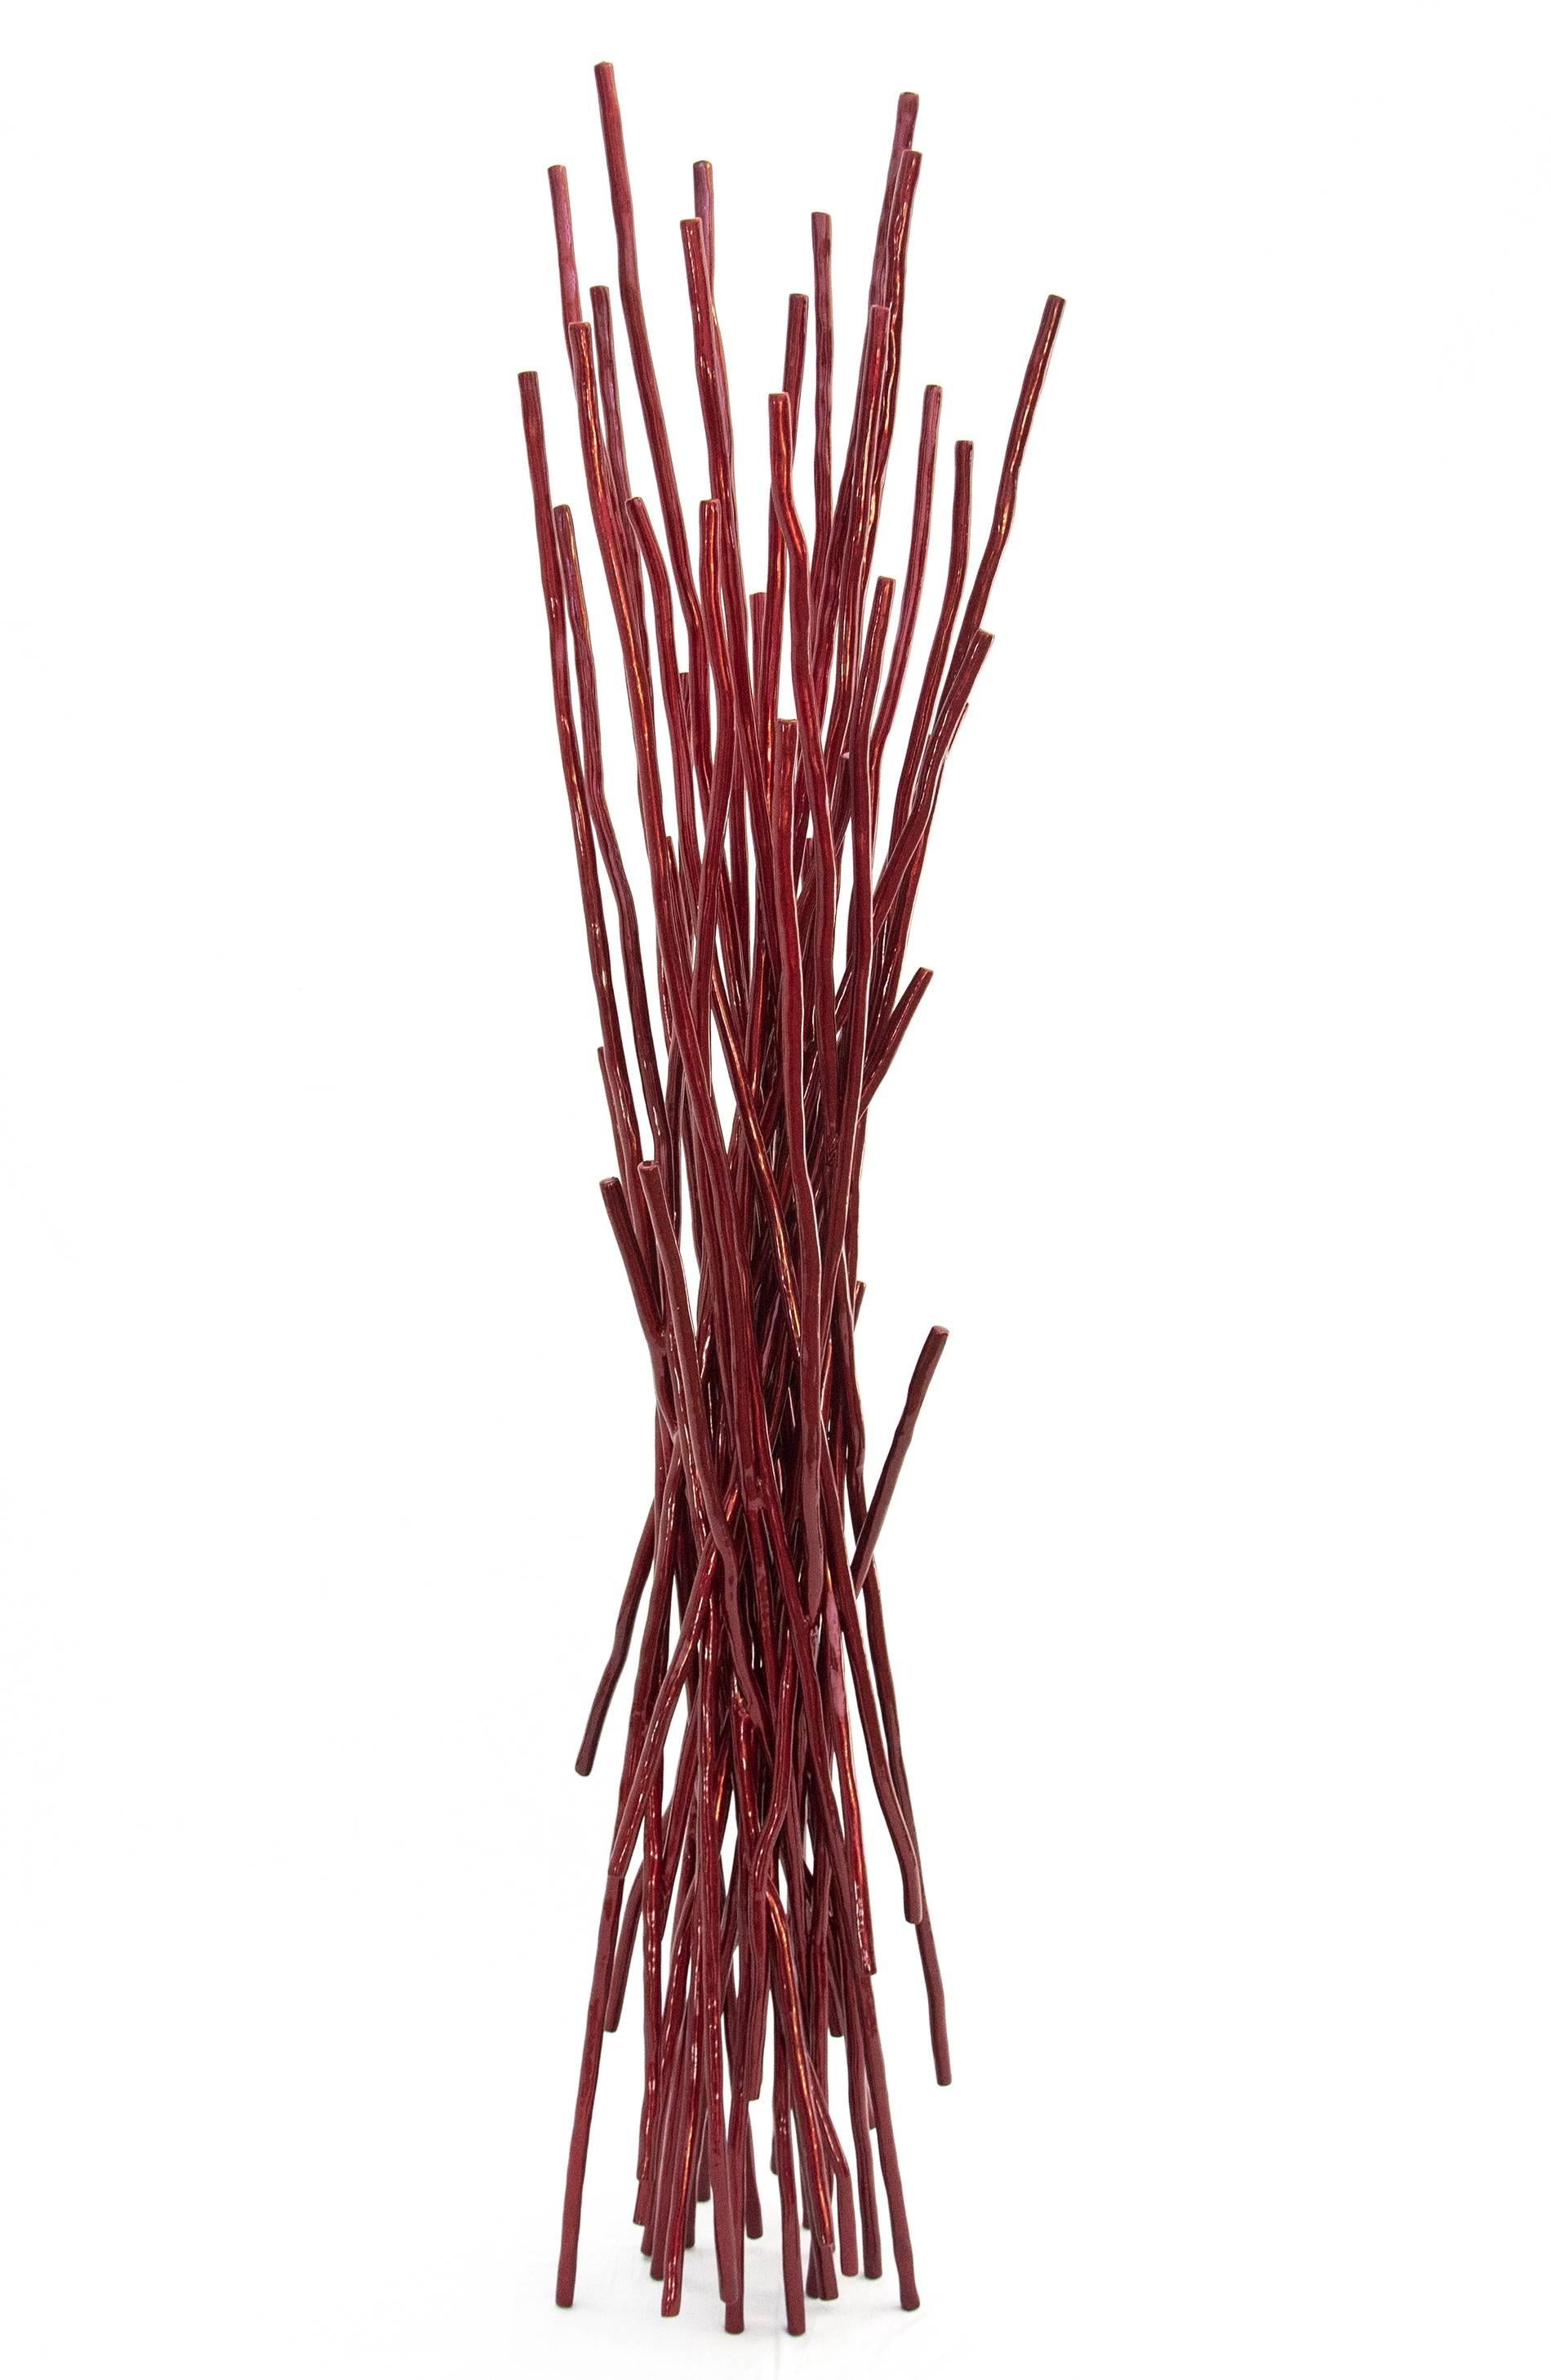 Shayne Dark Abstract Sculpture - Torrential Series, Candy Red